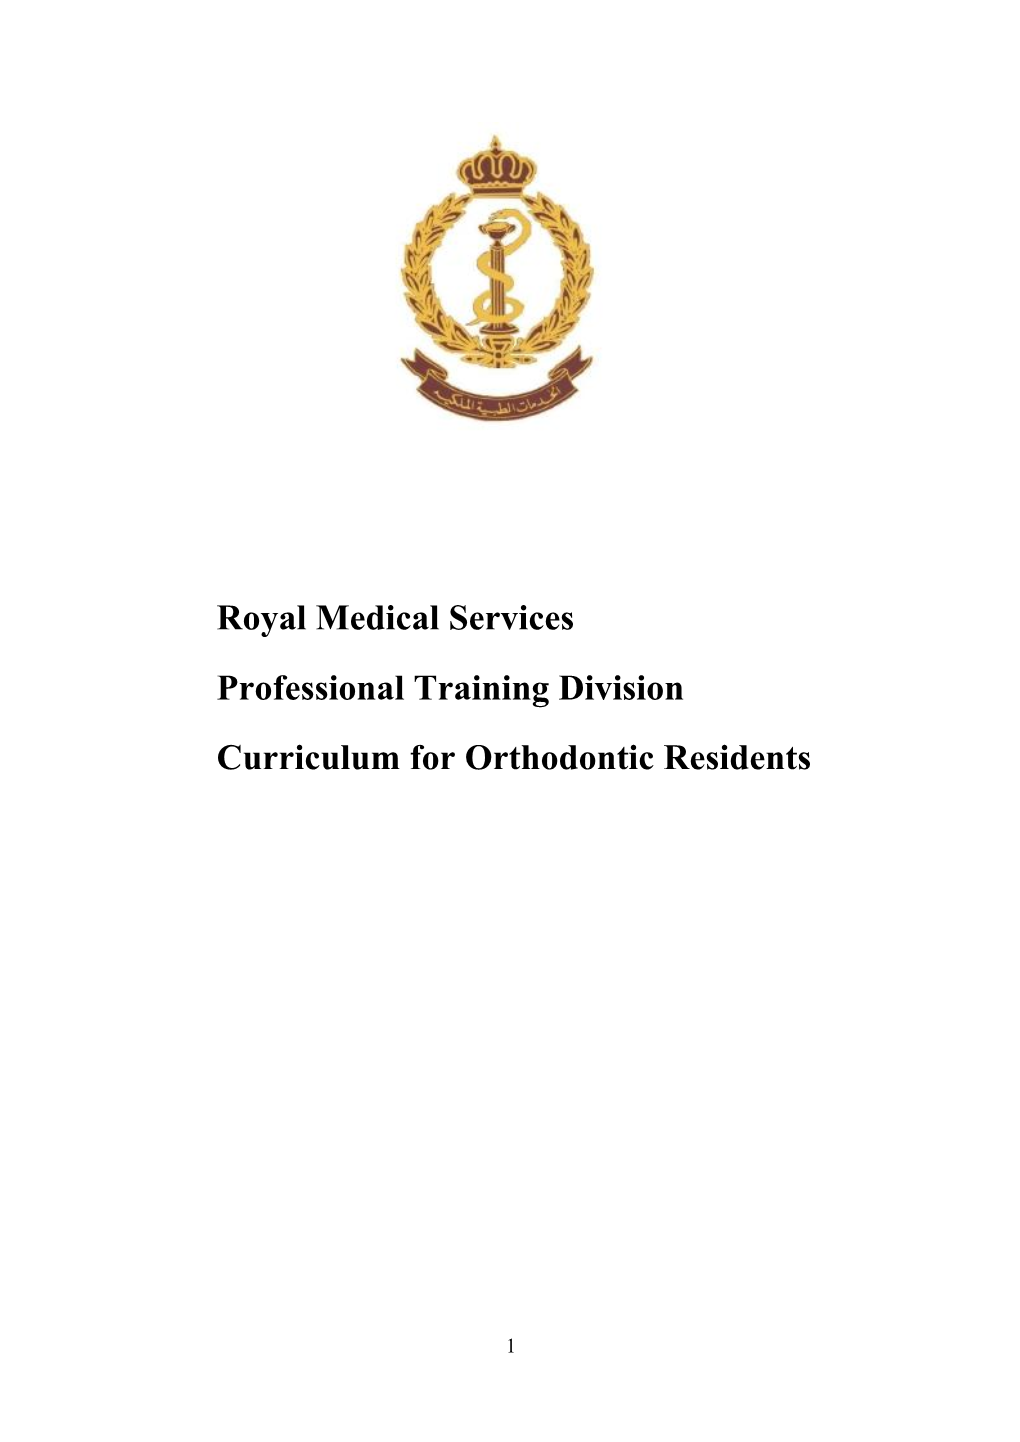 Royal Medical Services Professional Training Division Curriculum For